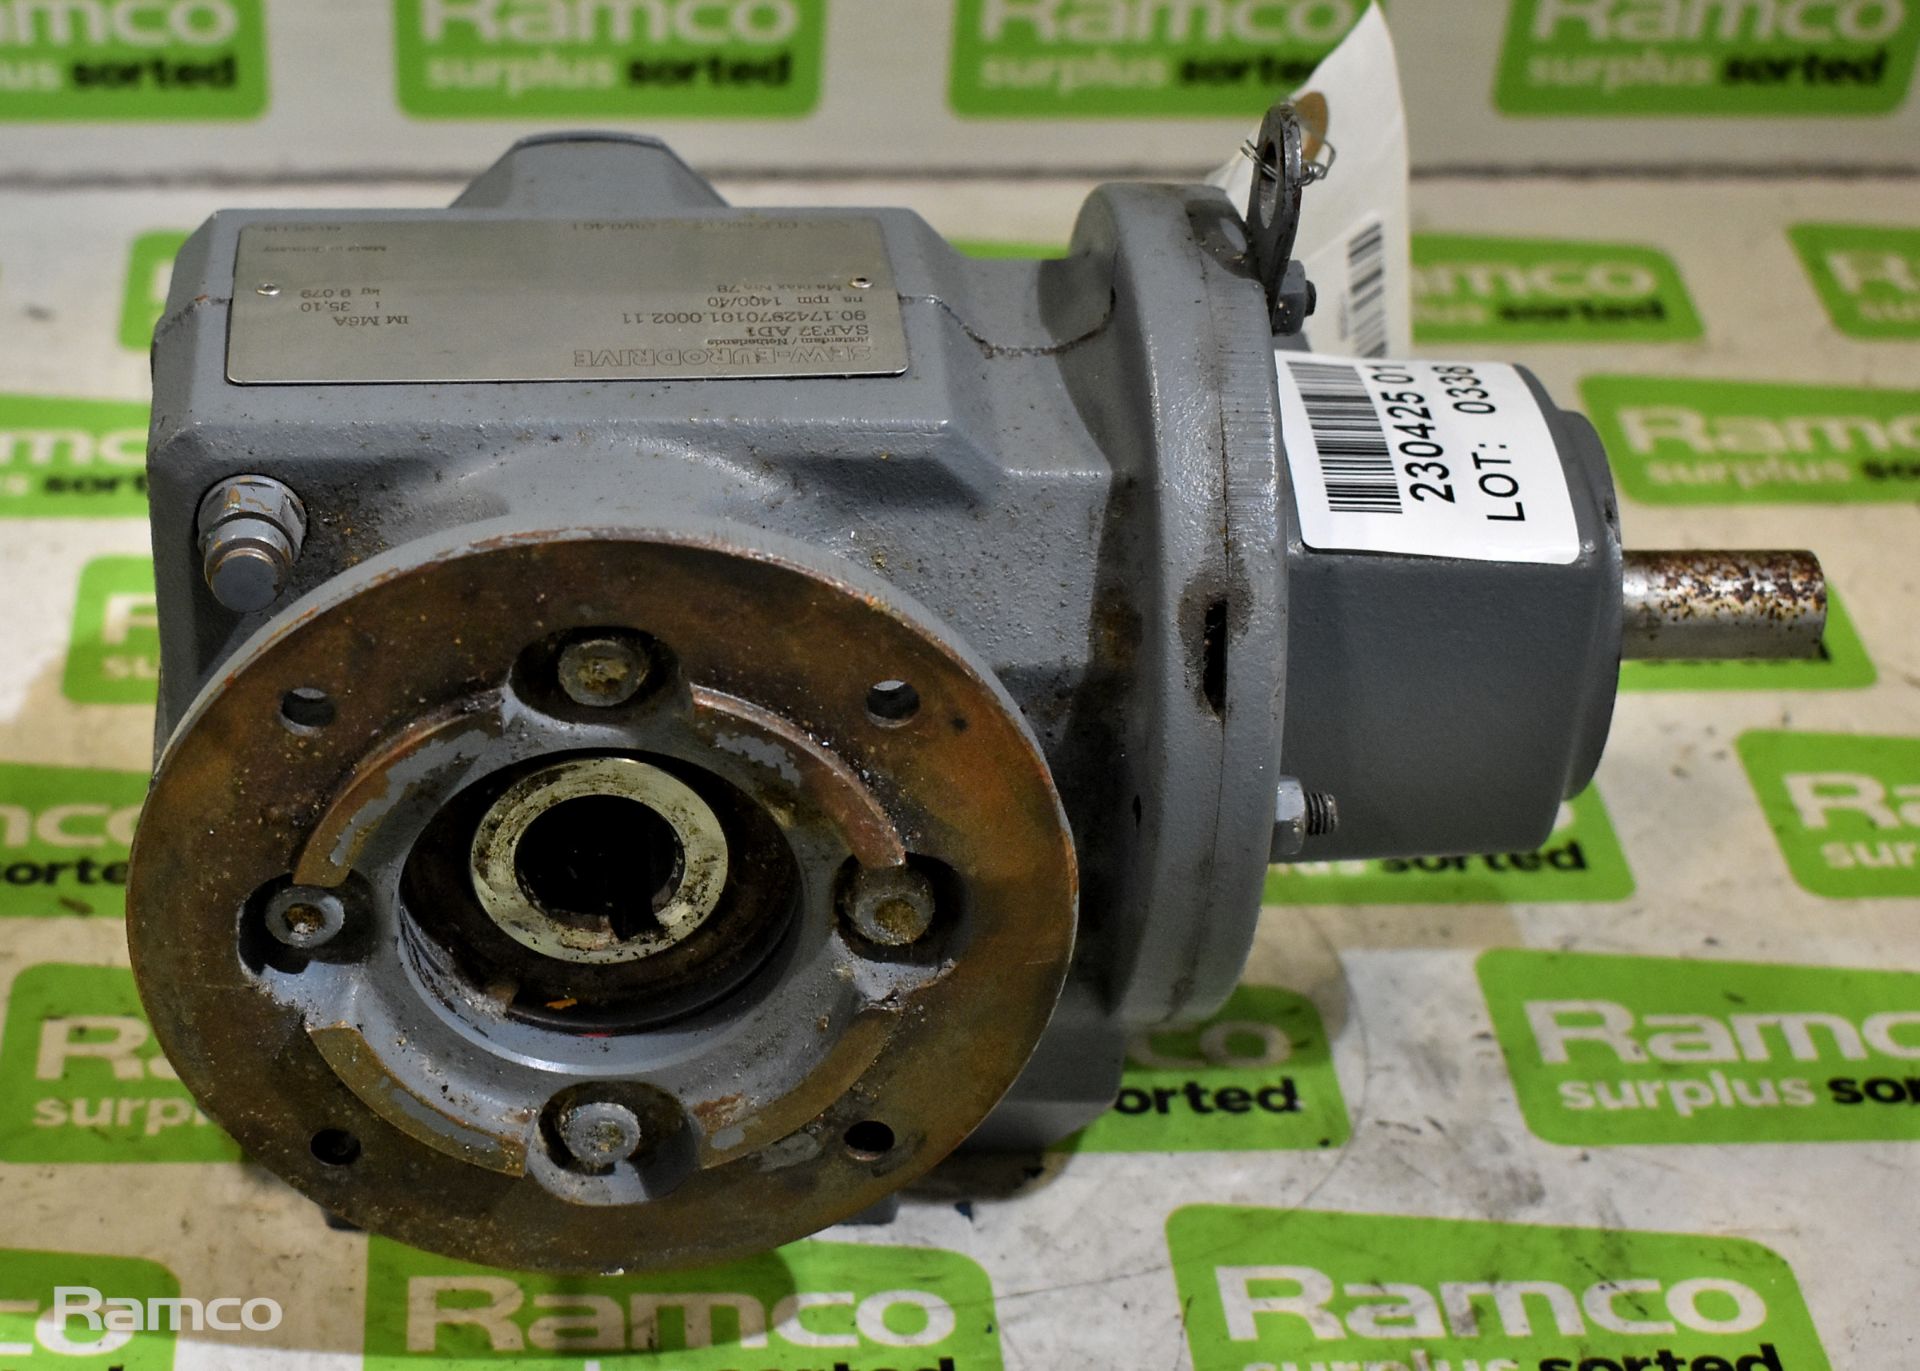 SEW-Eurodrive SAF37 AD1 gearbox for electric motor - Image 7 of 7